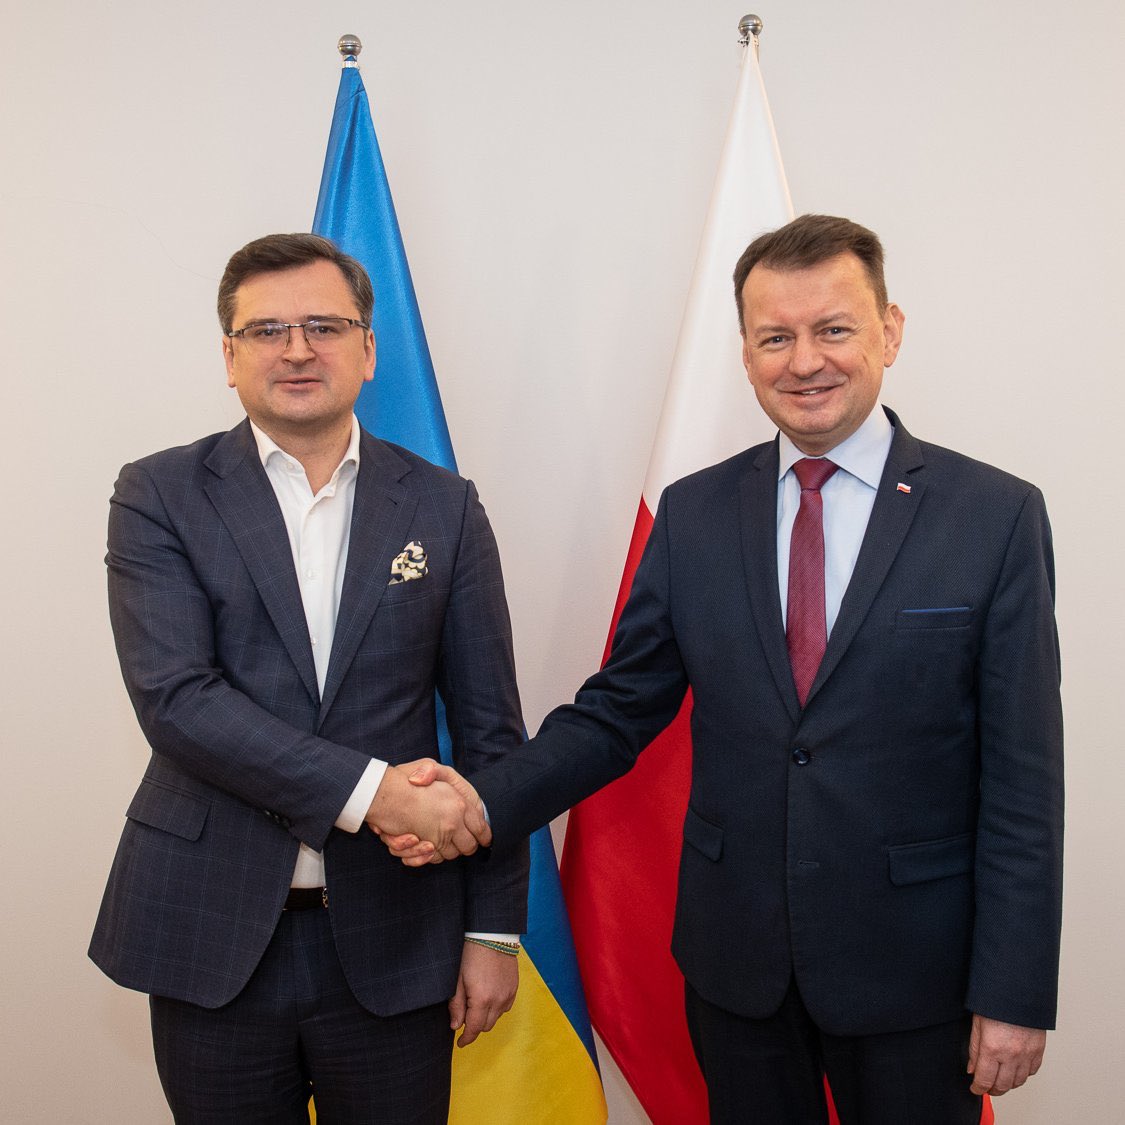 Ukraine FM Dmytro Kuleba: Met with Polish Minister of Defense @mblaszczak in Warsaw. We discussed latest frontline developments as Ukraine keeps fighting back Russian invaders. Grateful to Poland for standing by Ukraine resolutely